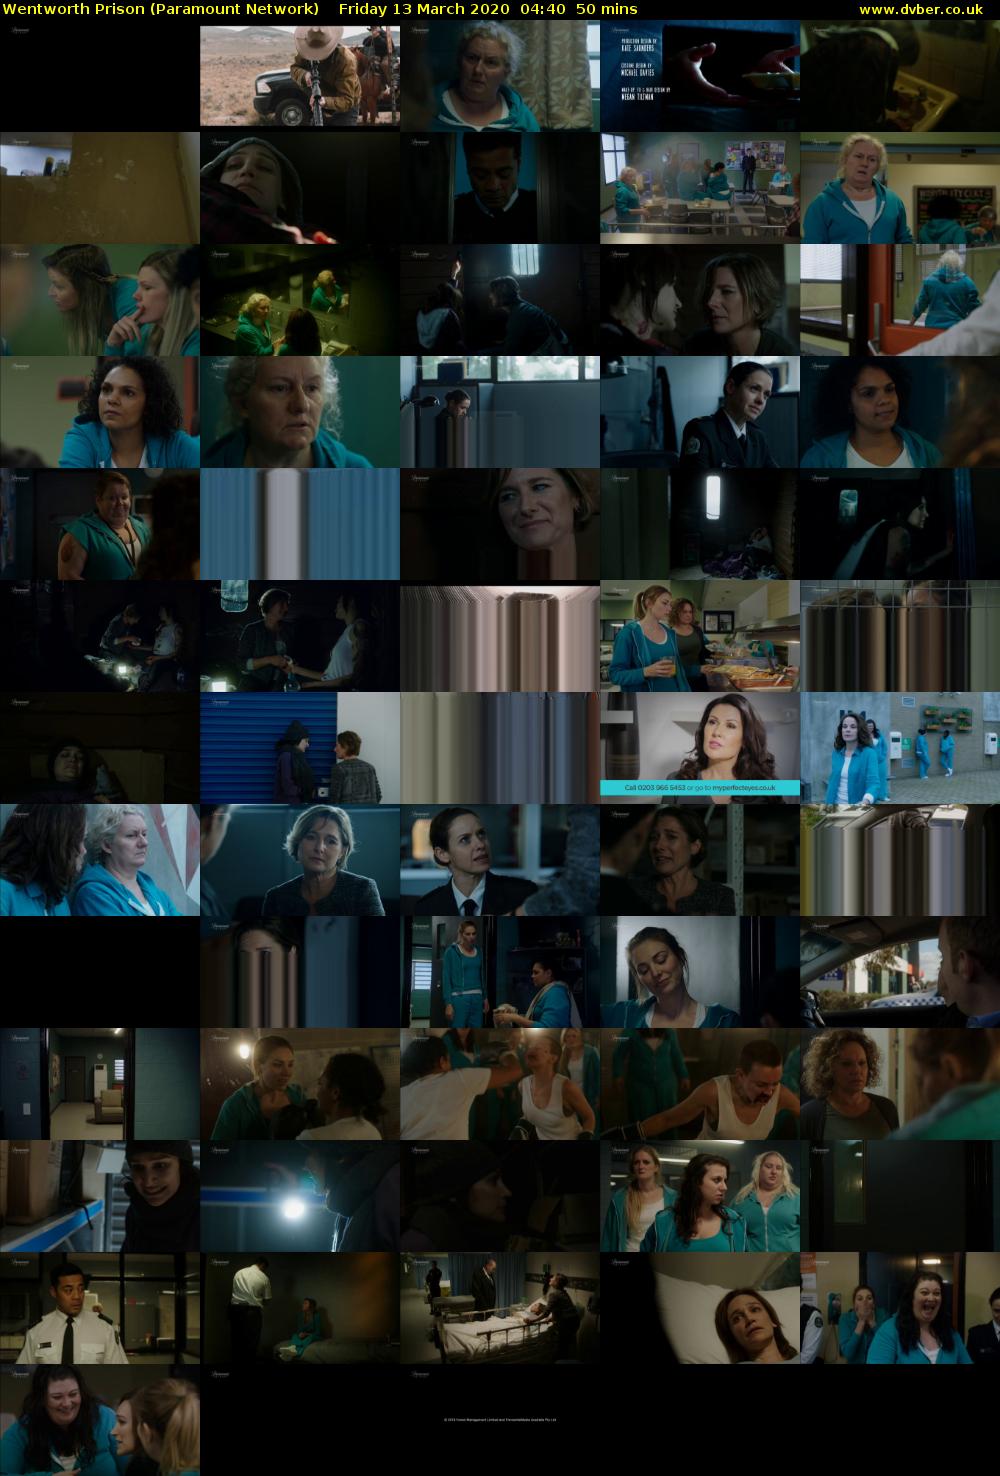 Wentworth Prison (Paramount Network) Friday 13 March 2020 04:40 - 05:30